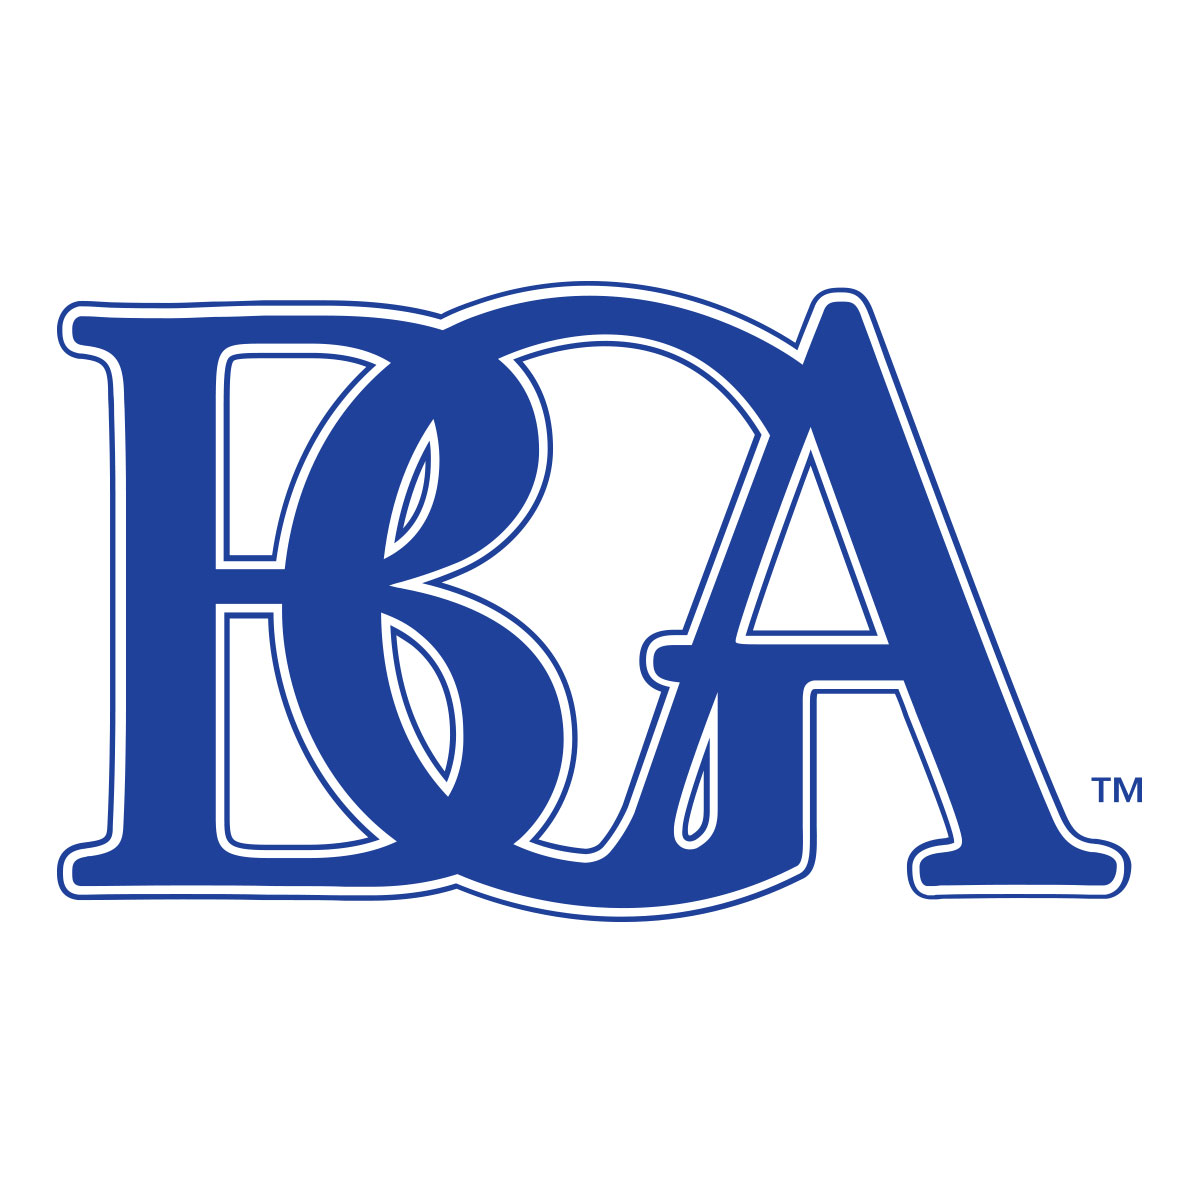 BGA – Registration open for the Elite Summer Camp 2021, in July to